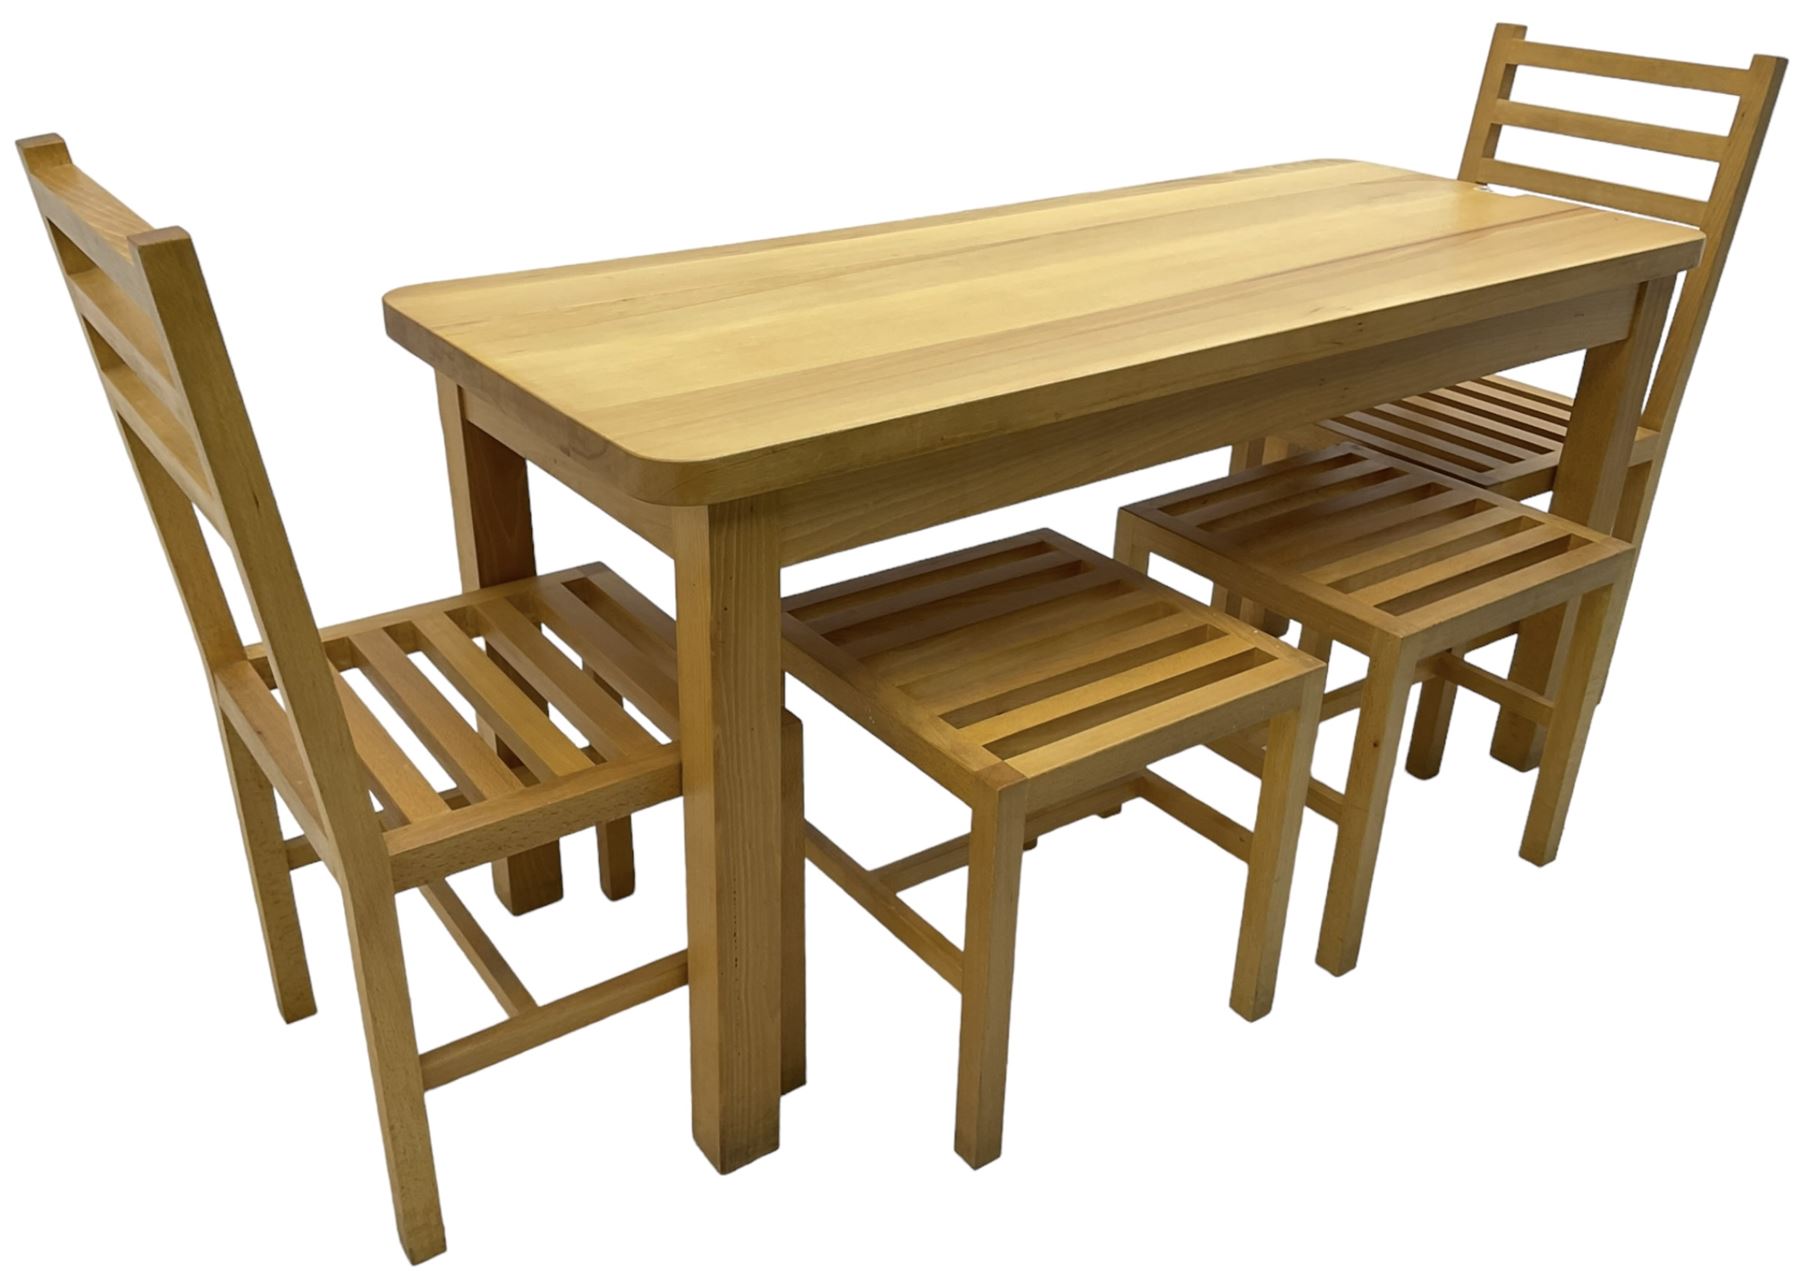 Light beech rectangular dining table; together with two chairs and two stools - Image 4 of 6